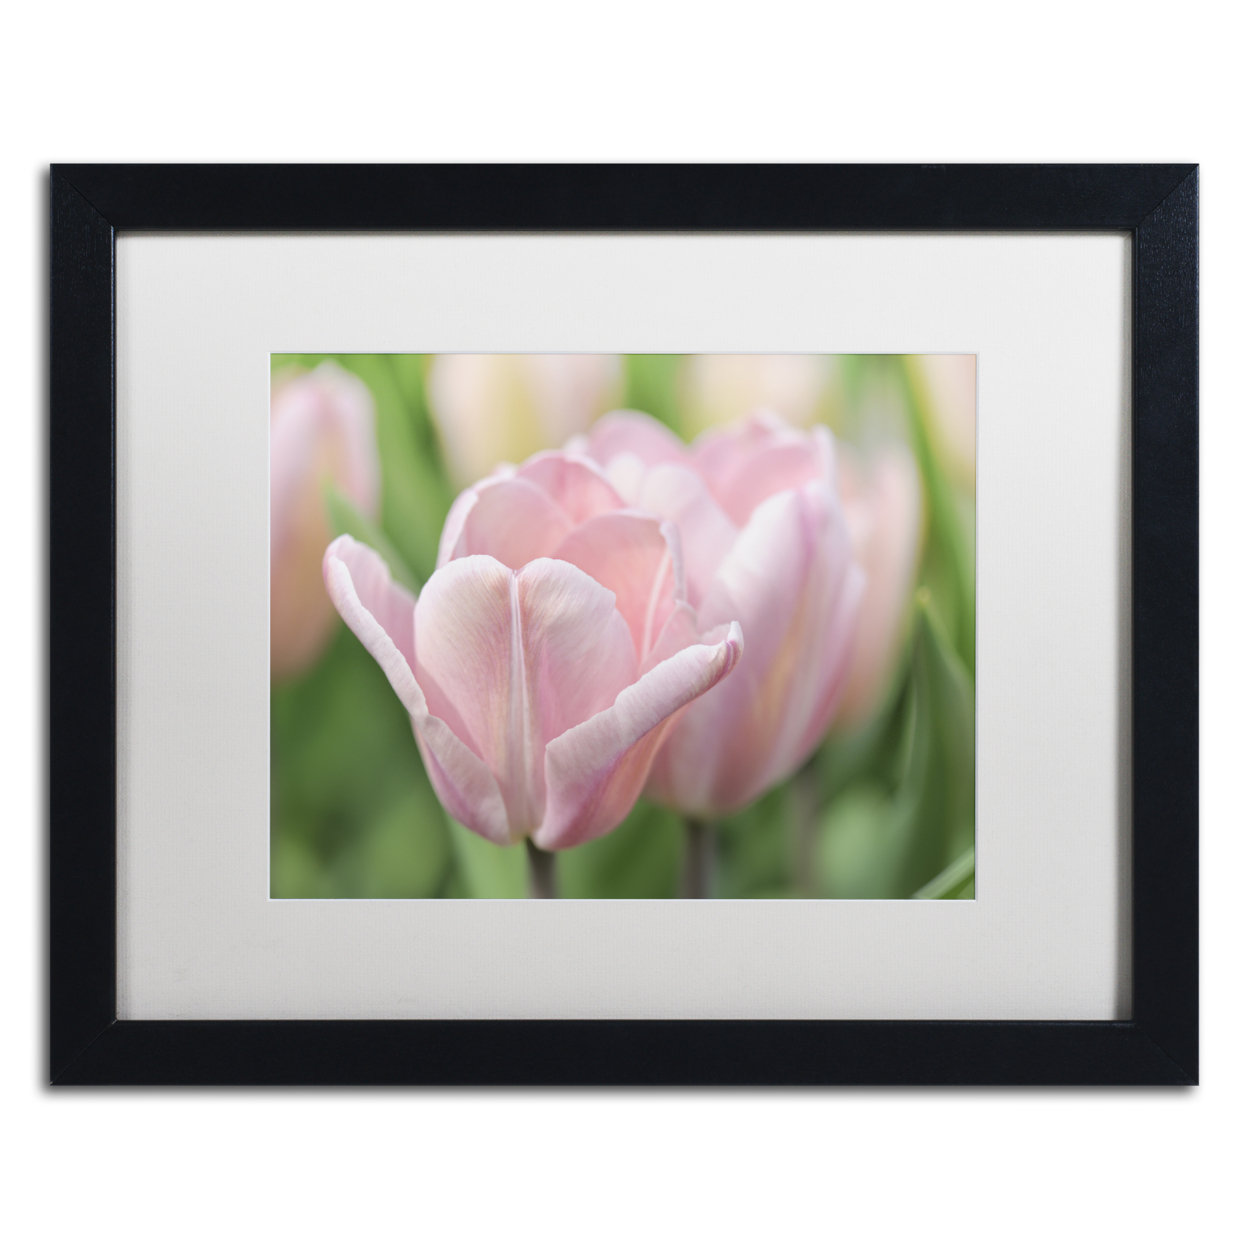 Cora Niele 'Pink Tulip Baronesse' Black Wooden Framed Art 18 X 22 Inches